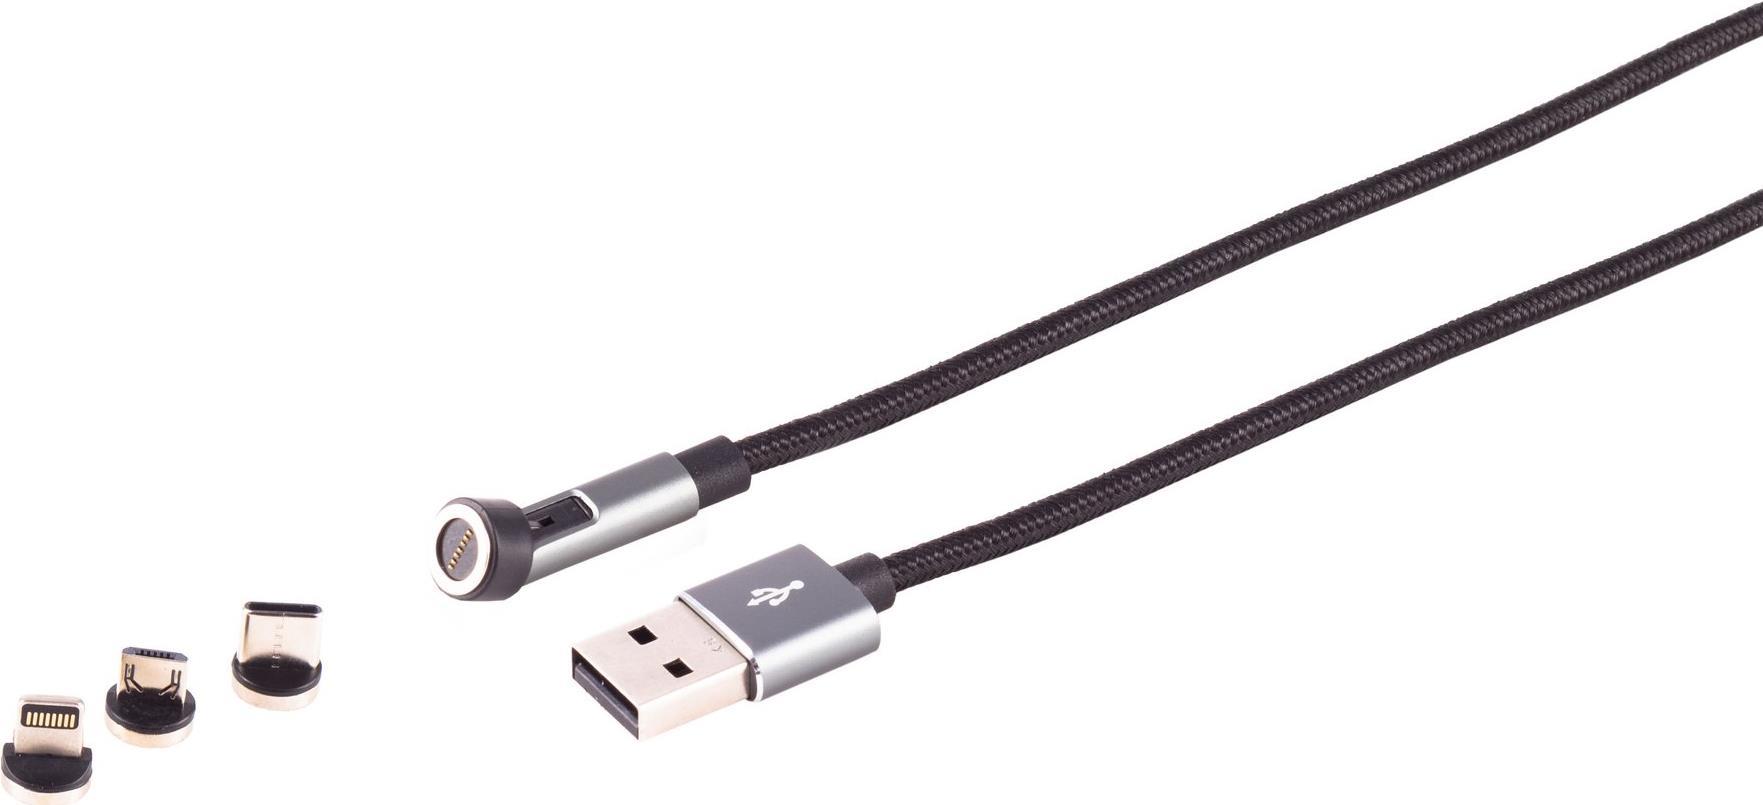 S/CONN maximum connectivity Universal--USB-A Magnetkabel, 3in1, 540°, 7-Pin, weiß, 1,0m (14-19010)